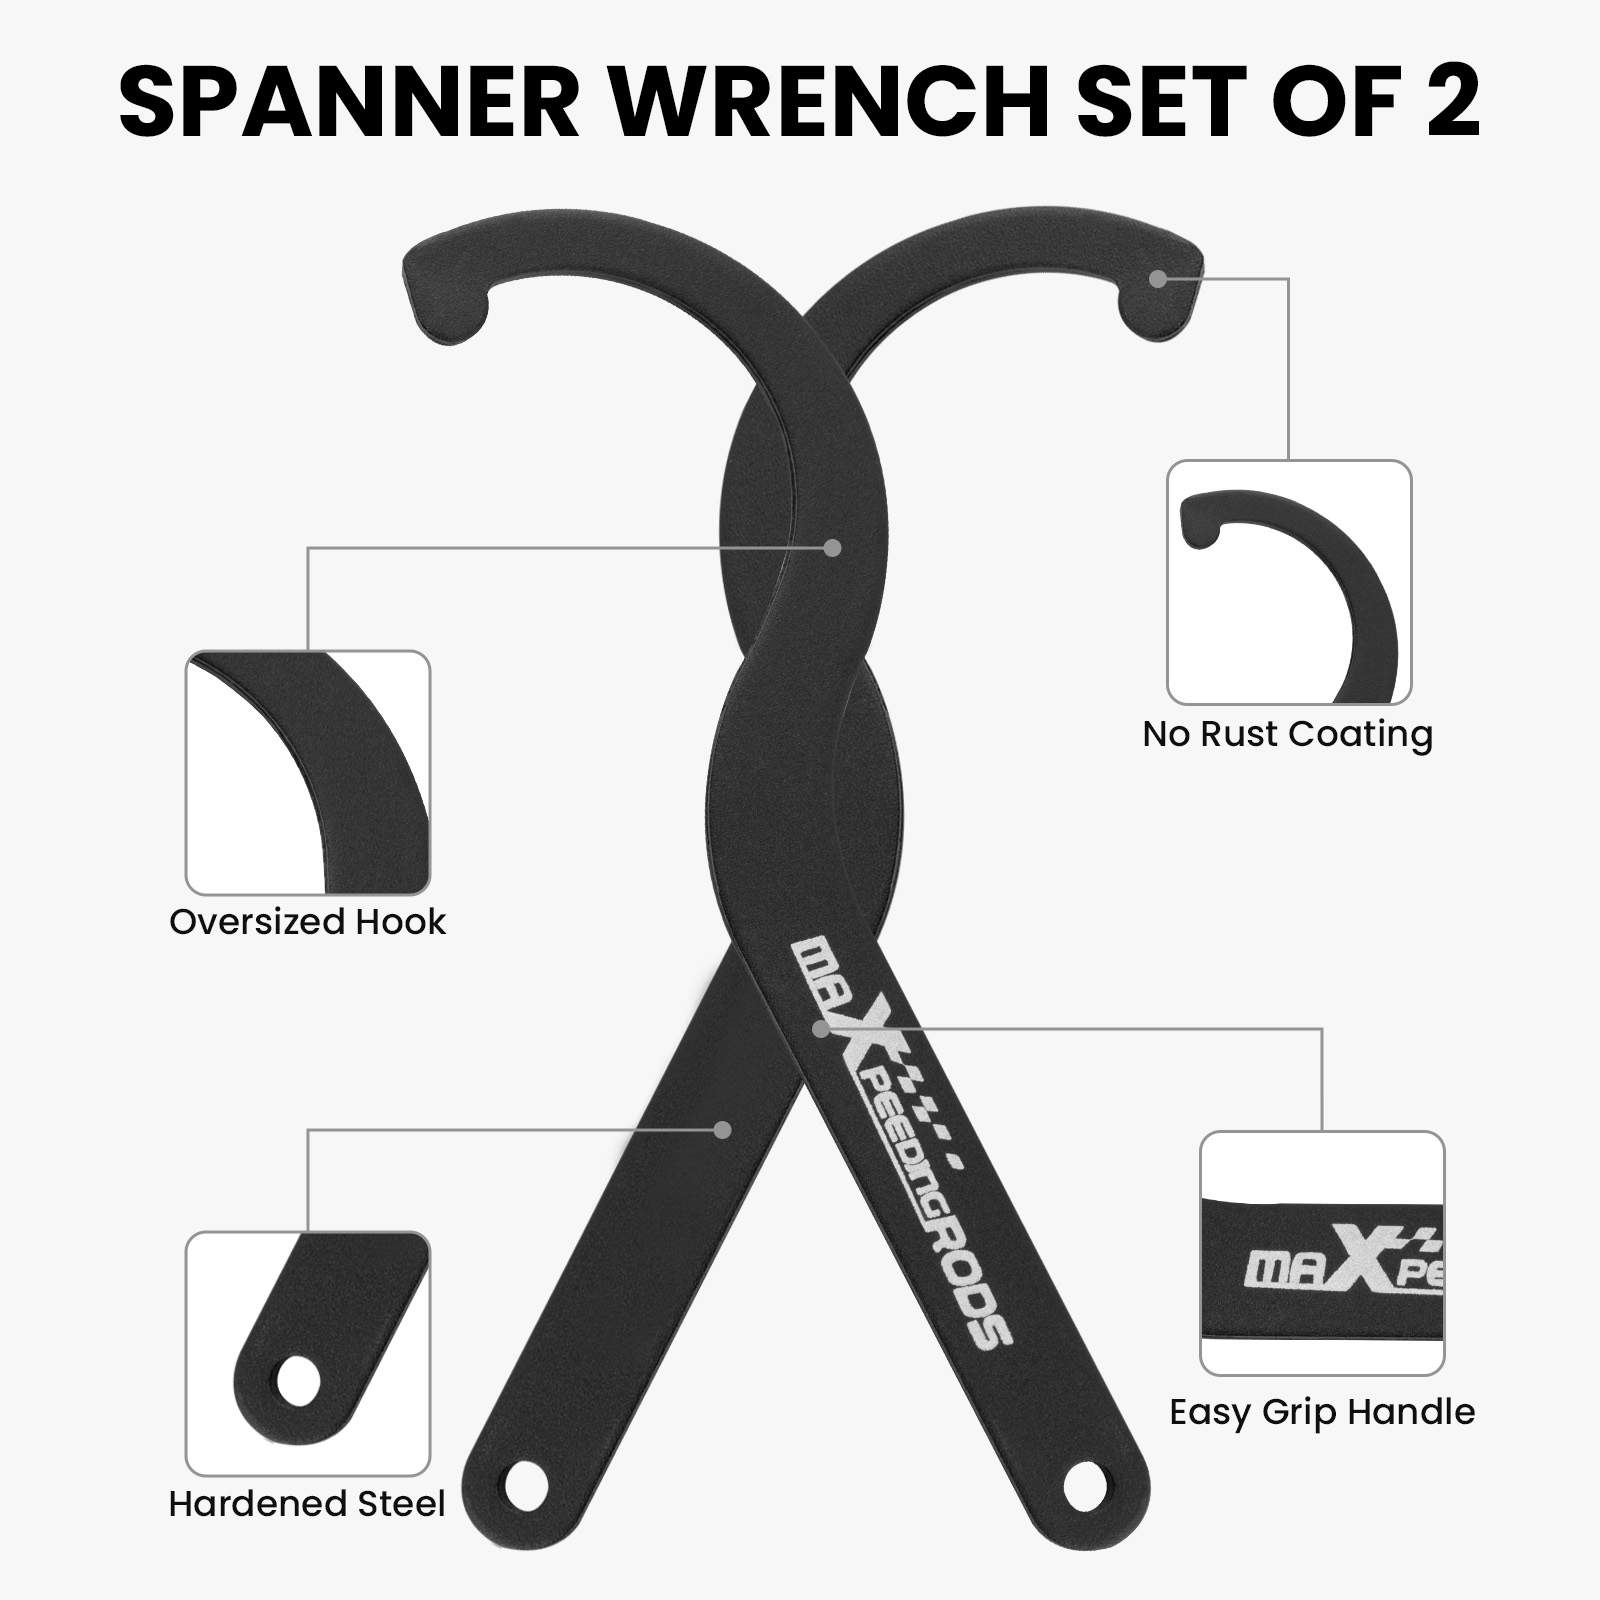 6 Pieces Spanner Wrench Set Adjustable Coilover Wrench Spanners Hoo